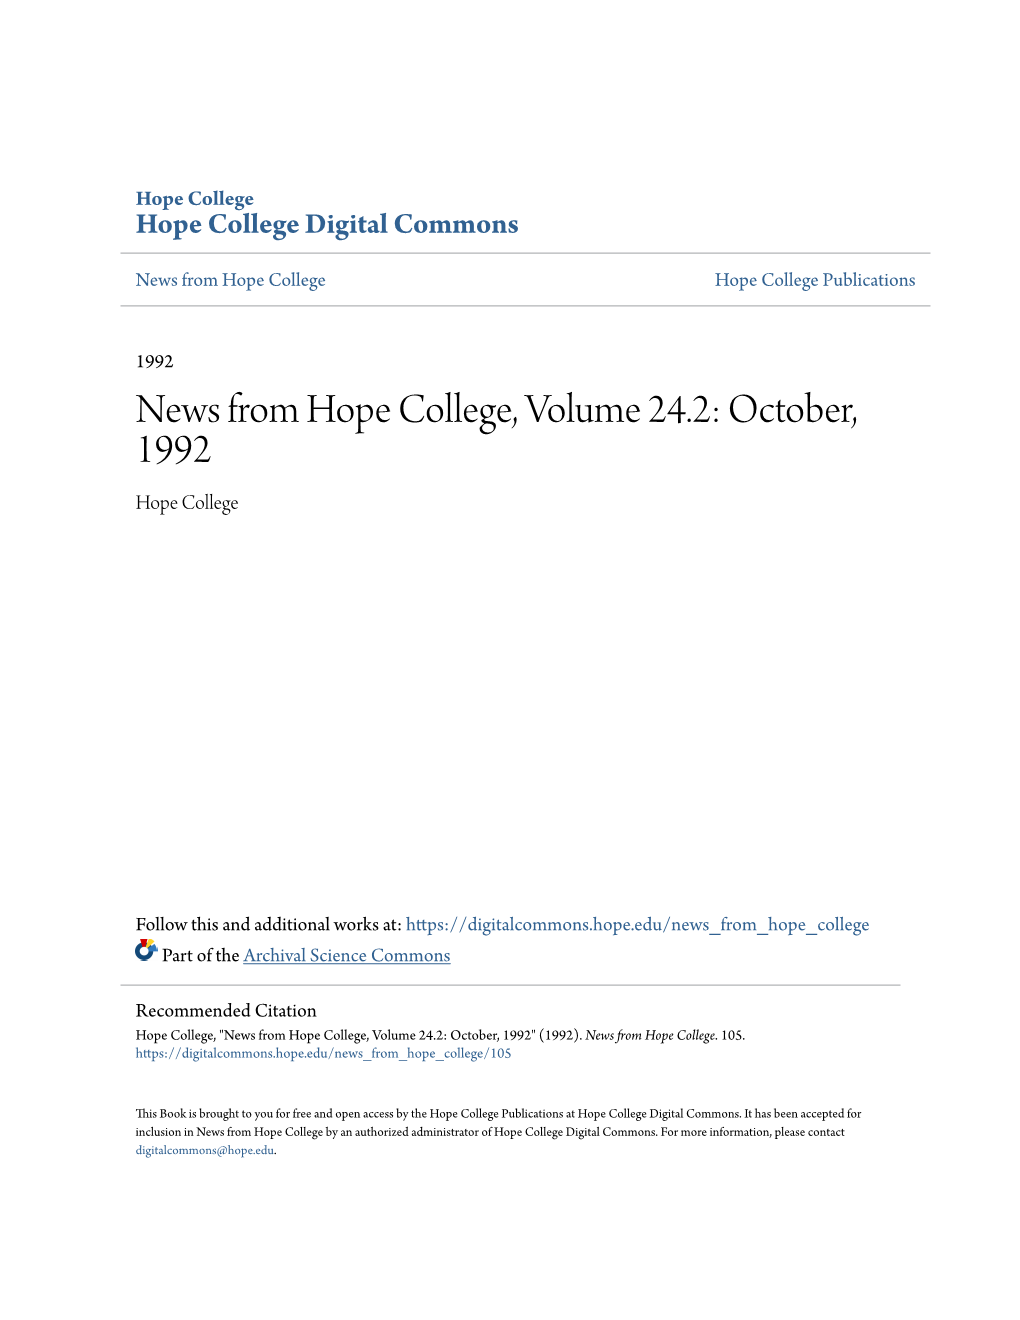 News from Hope College, Volume 24.2: October, 1992 Hope College